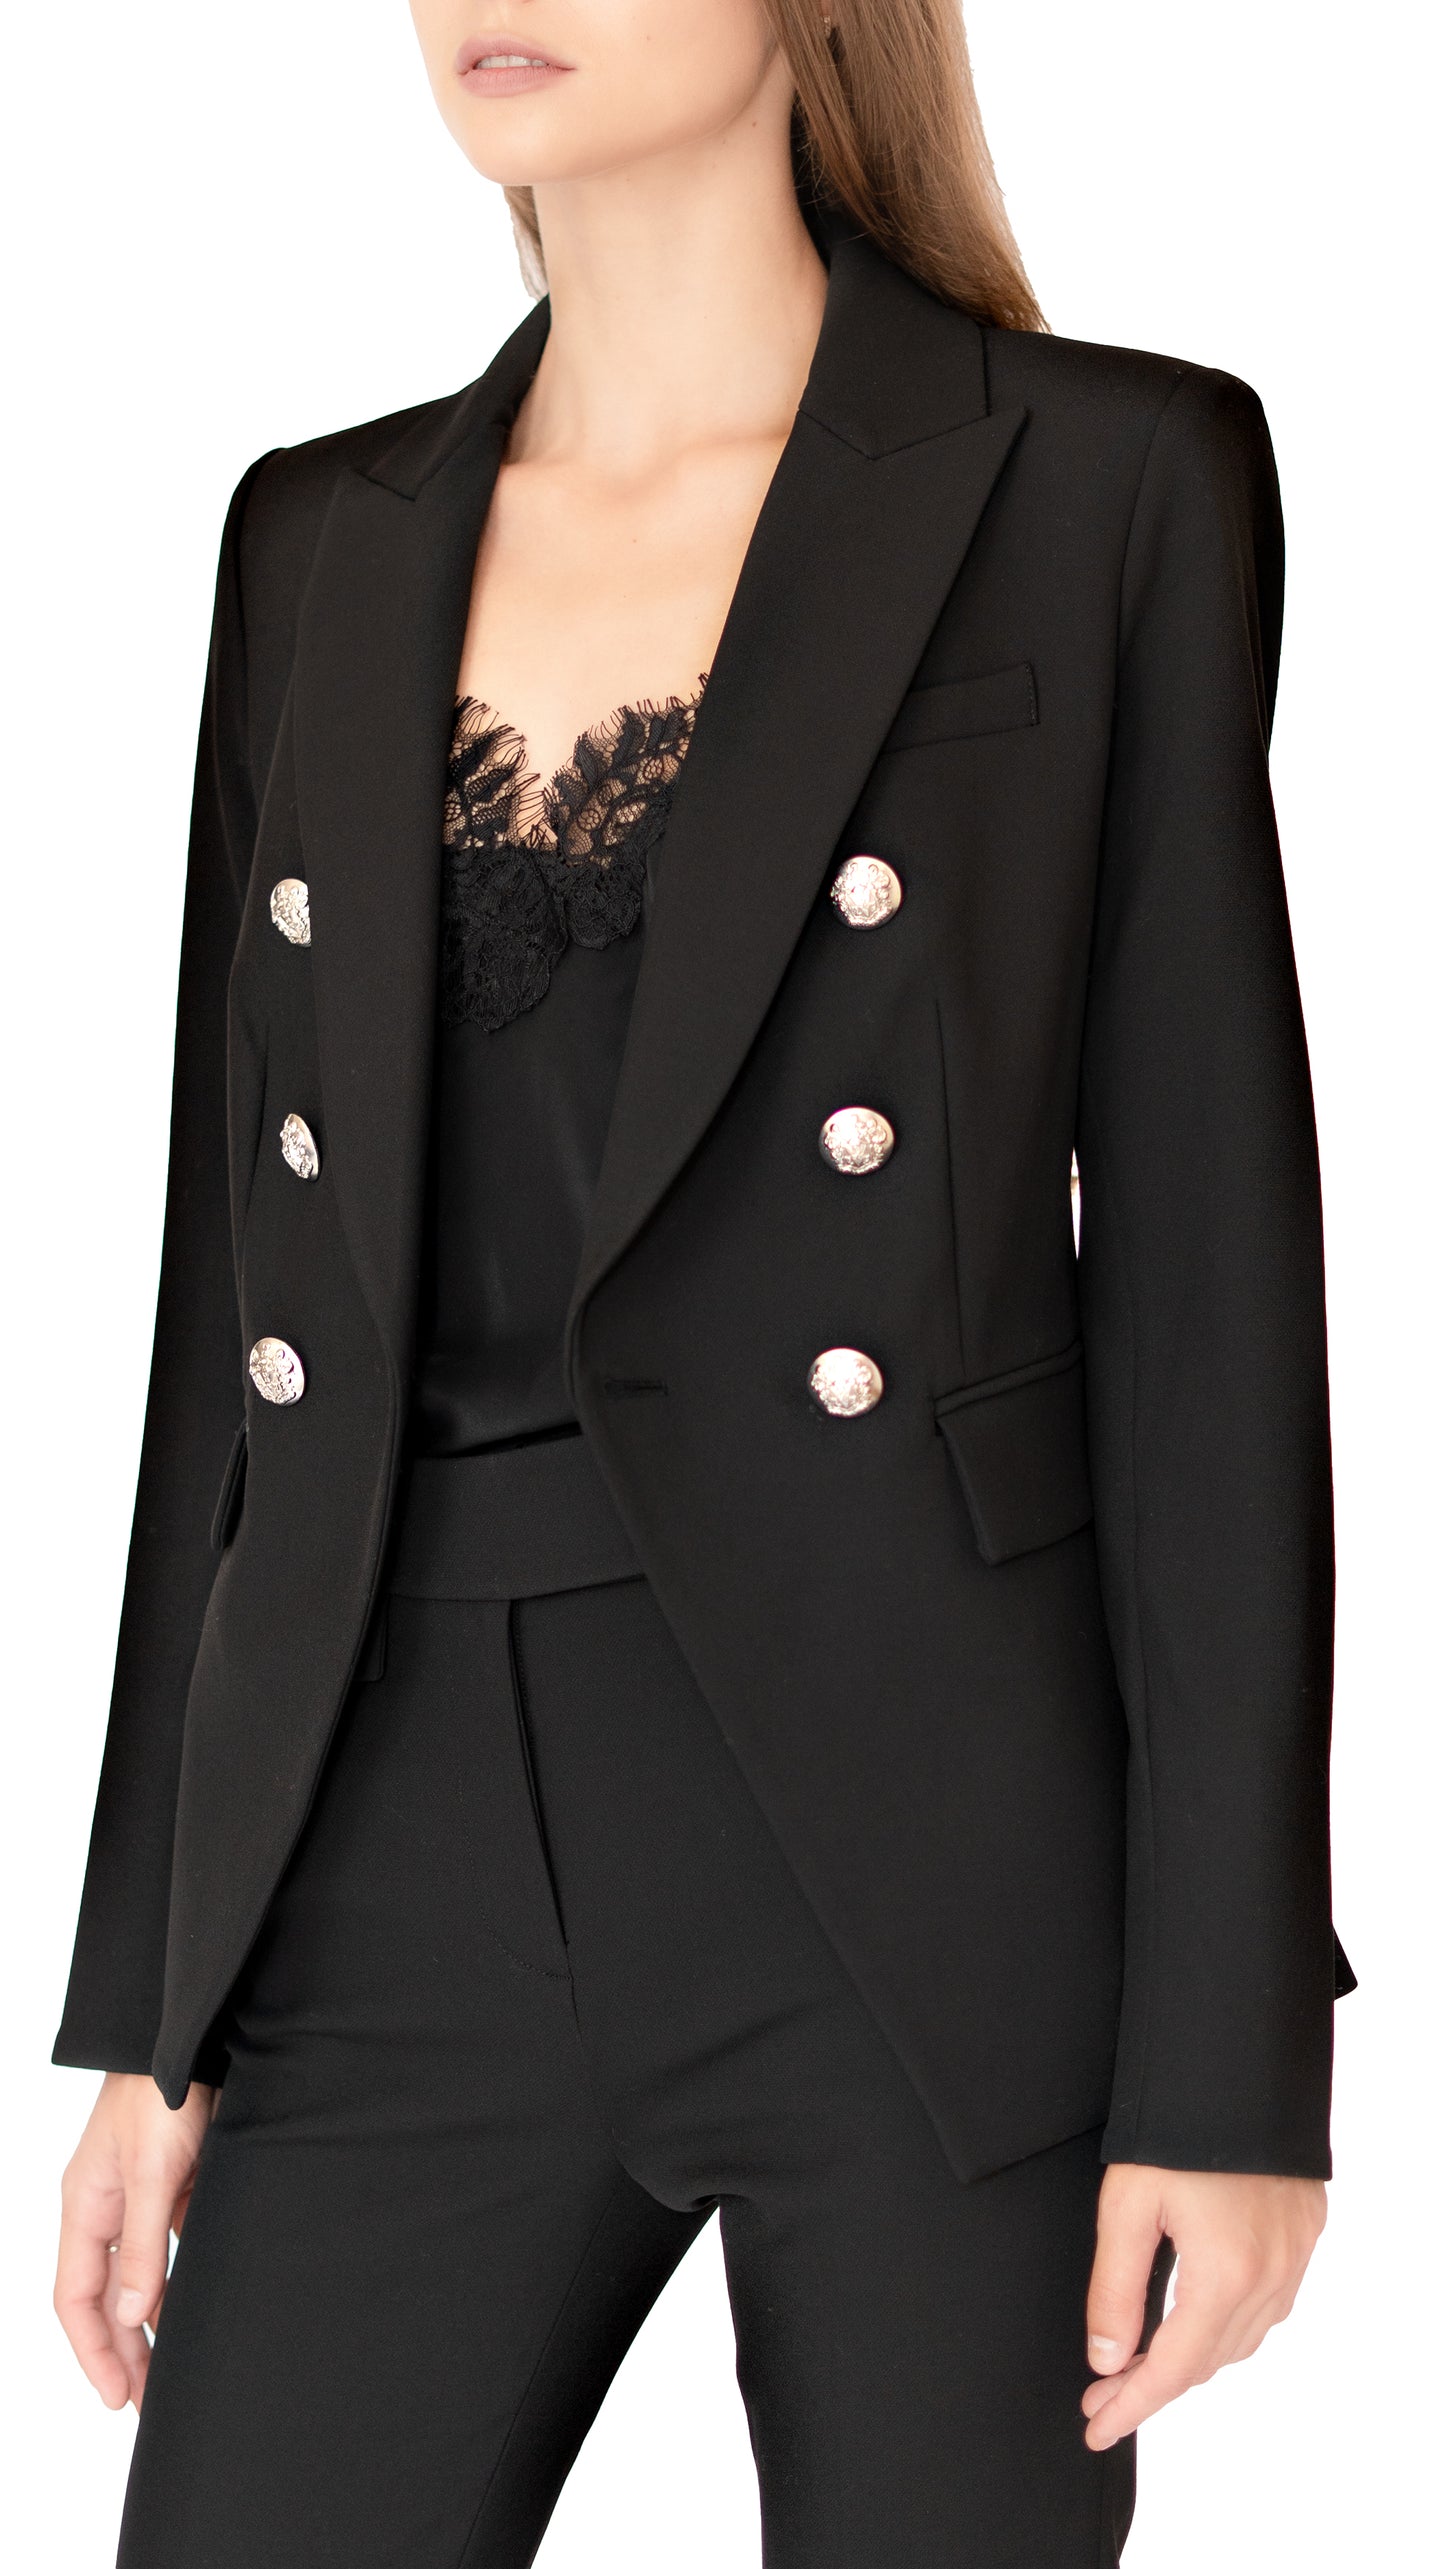 Veronica Beard black suit jacket with silver buttons